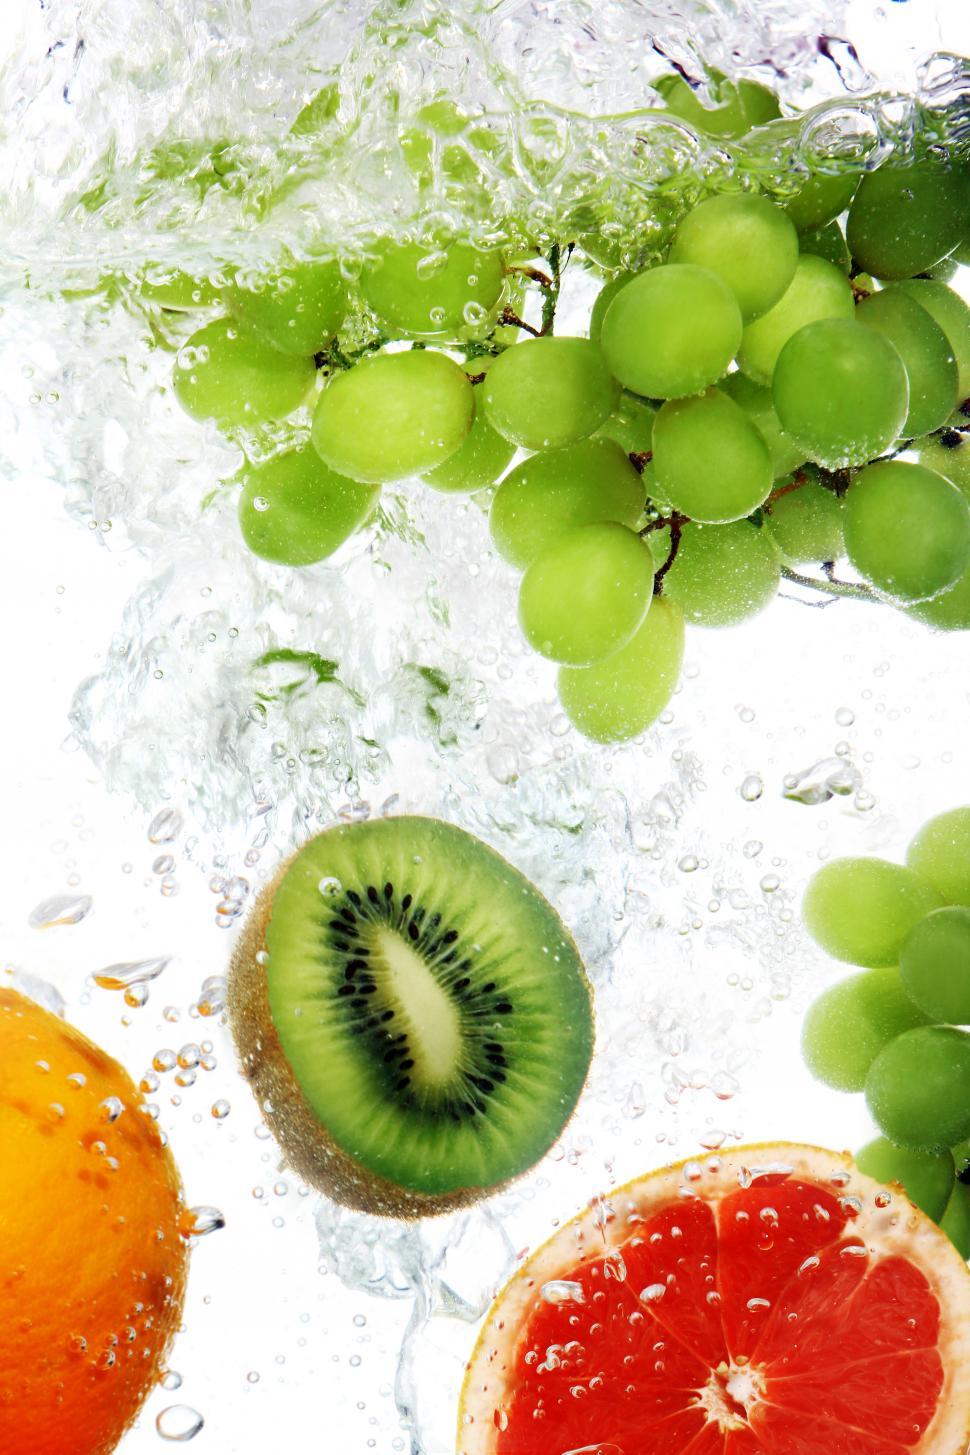 Free Image of Fruit dropped into water 